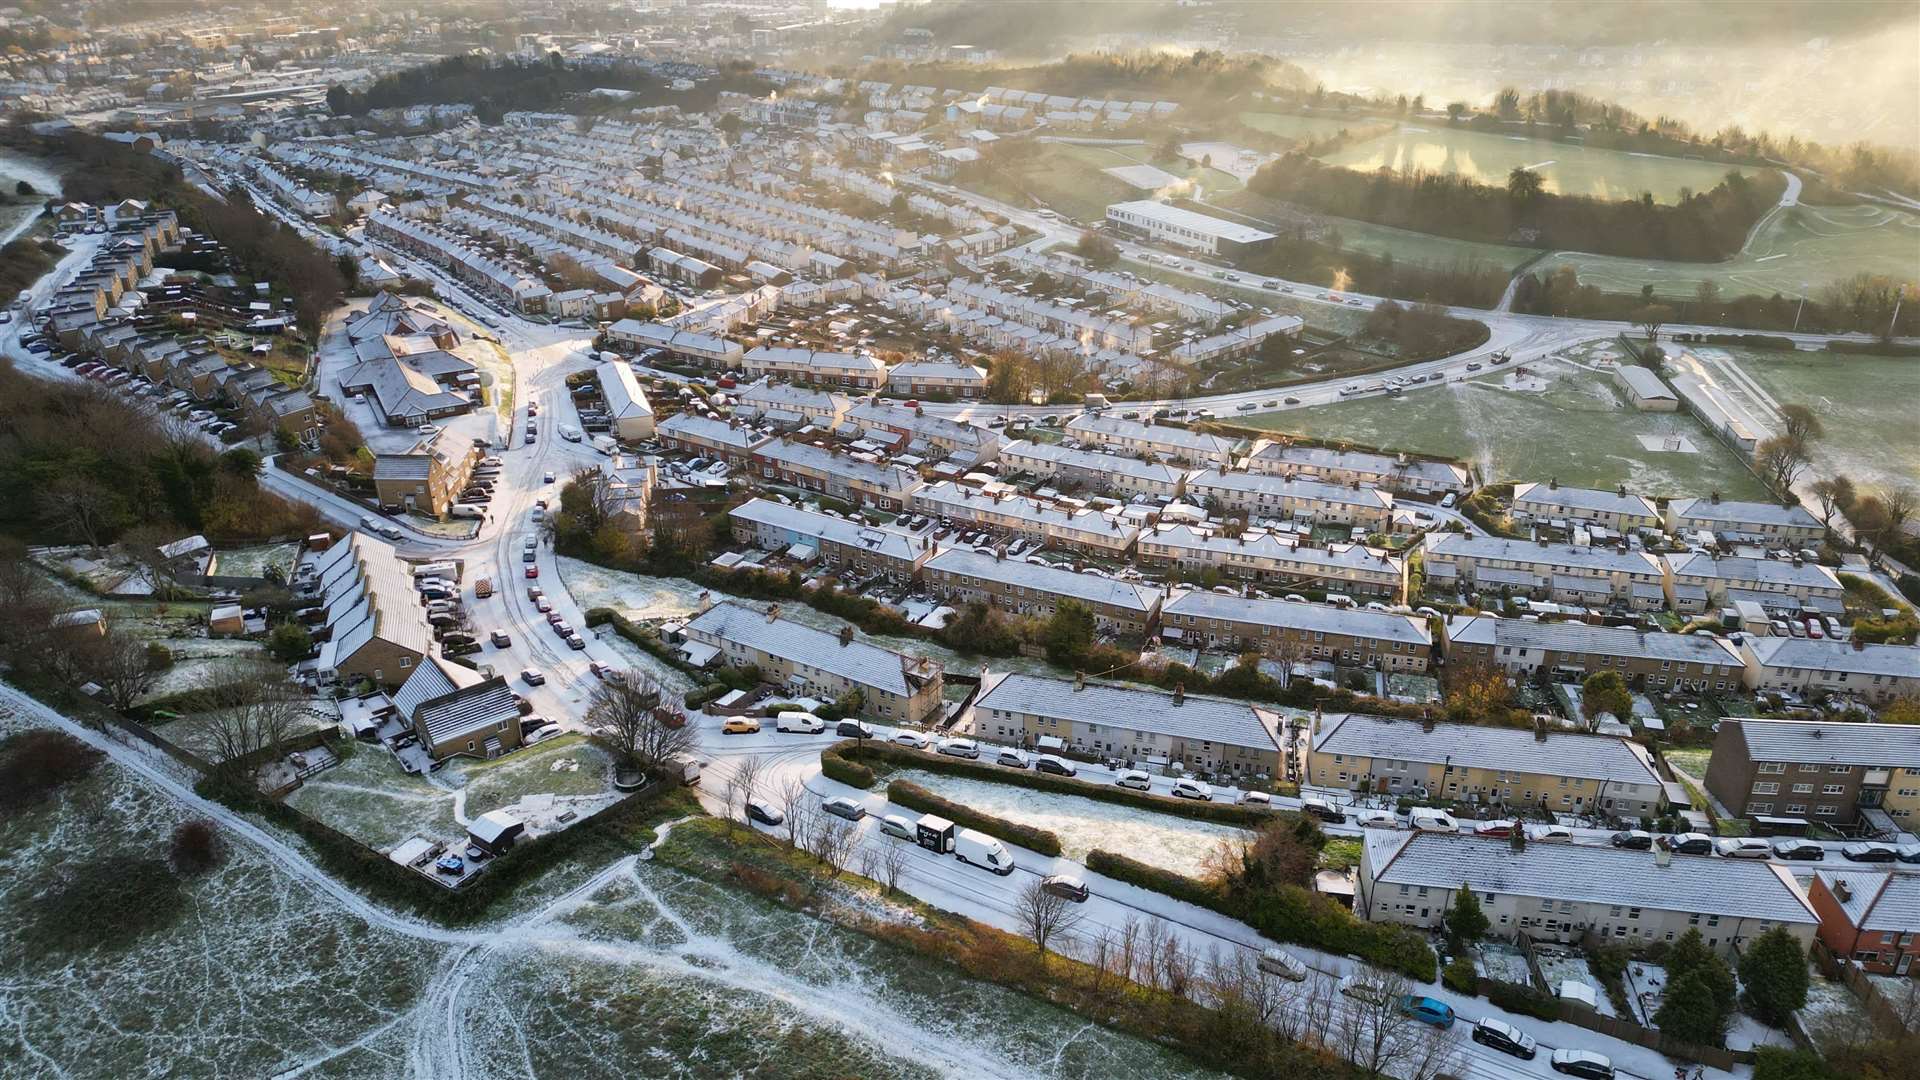 Drone images show a wintery morning in Tower Hamlets in Dover. Photo: Mark Hamilton